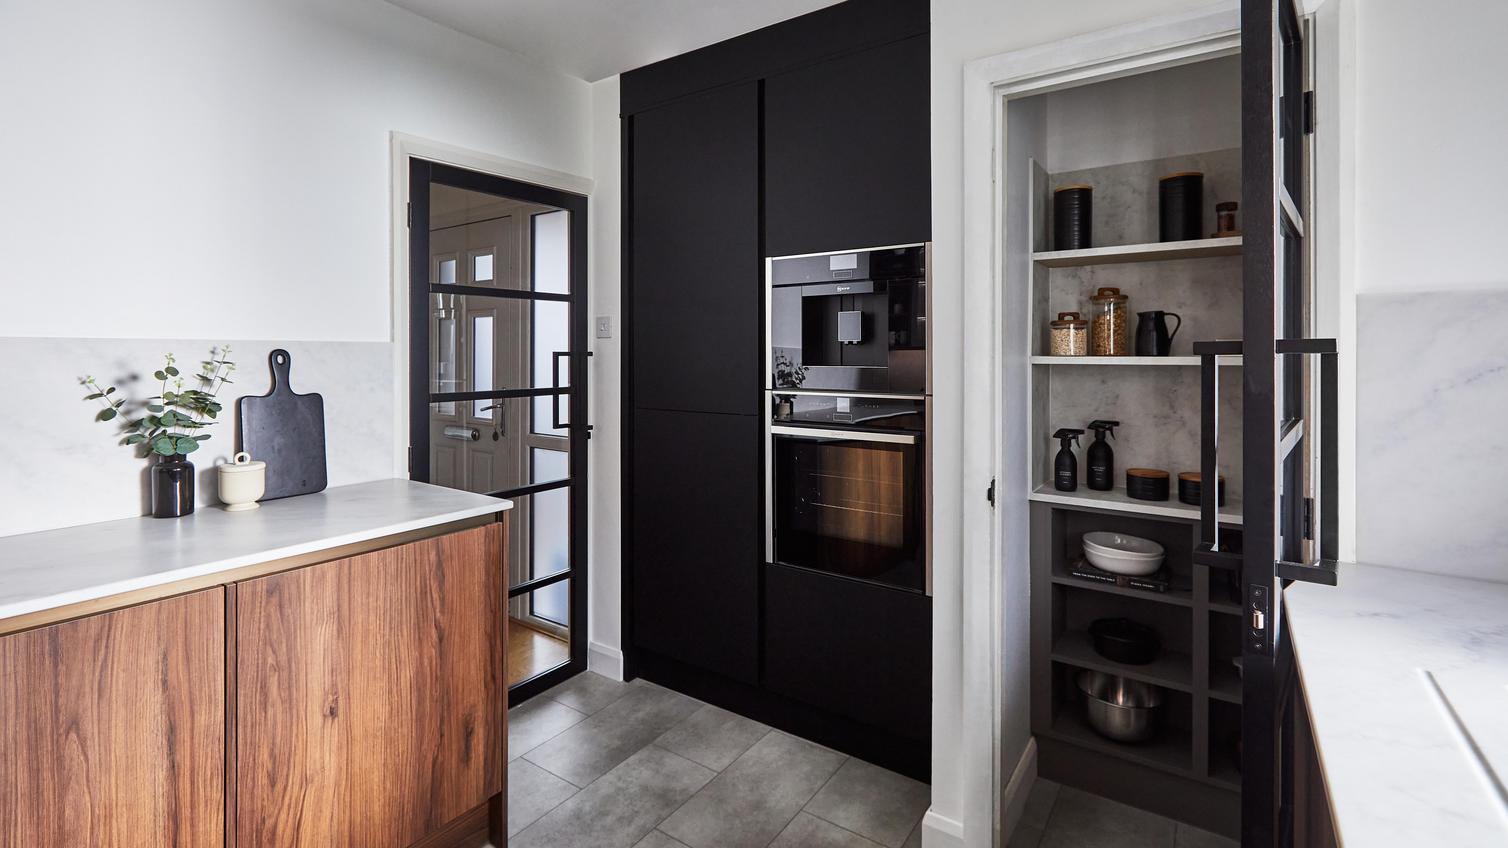 Contemporary kitchen featuring walnut and black cupboards in a slab design. Has a pantry with open shelves and a glass door.